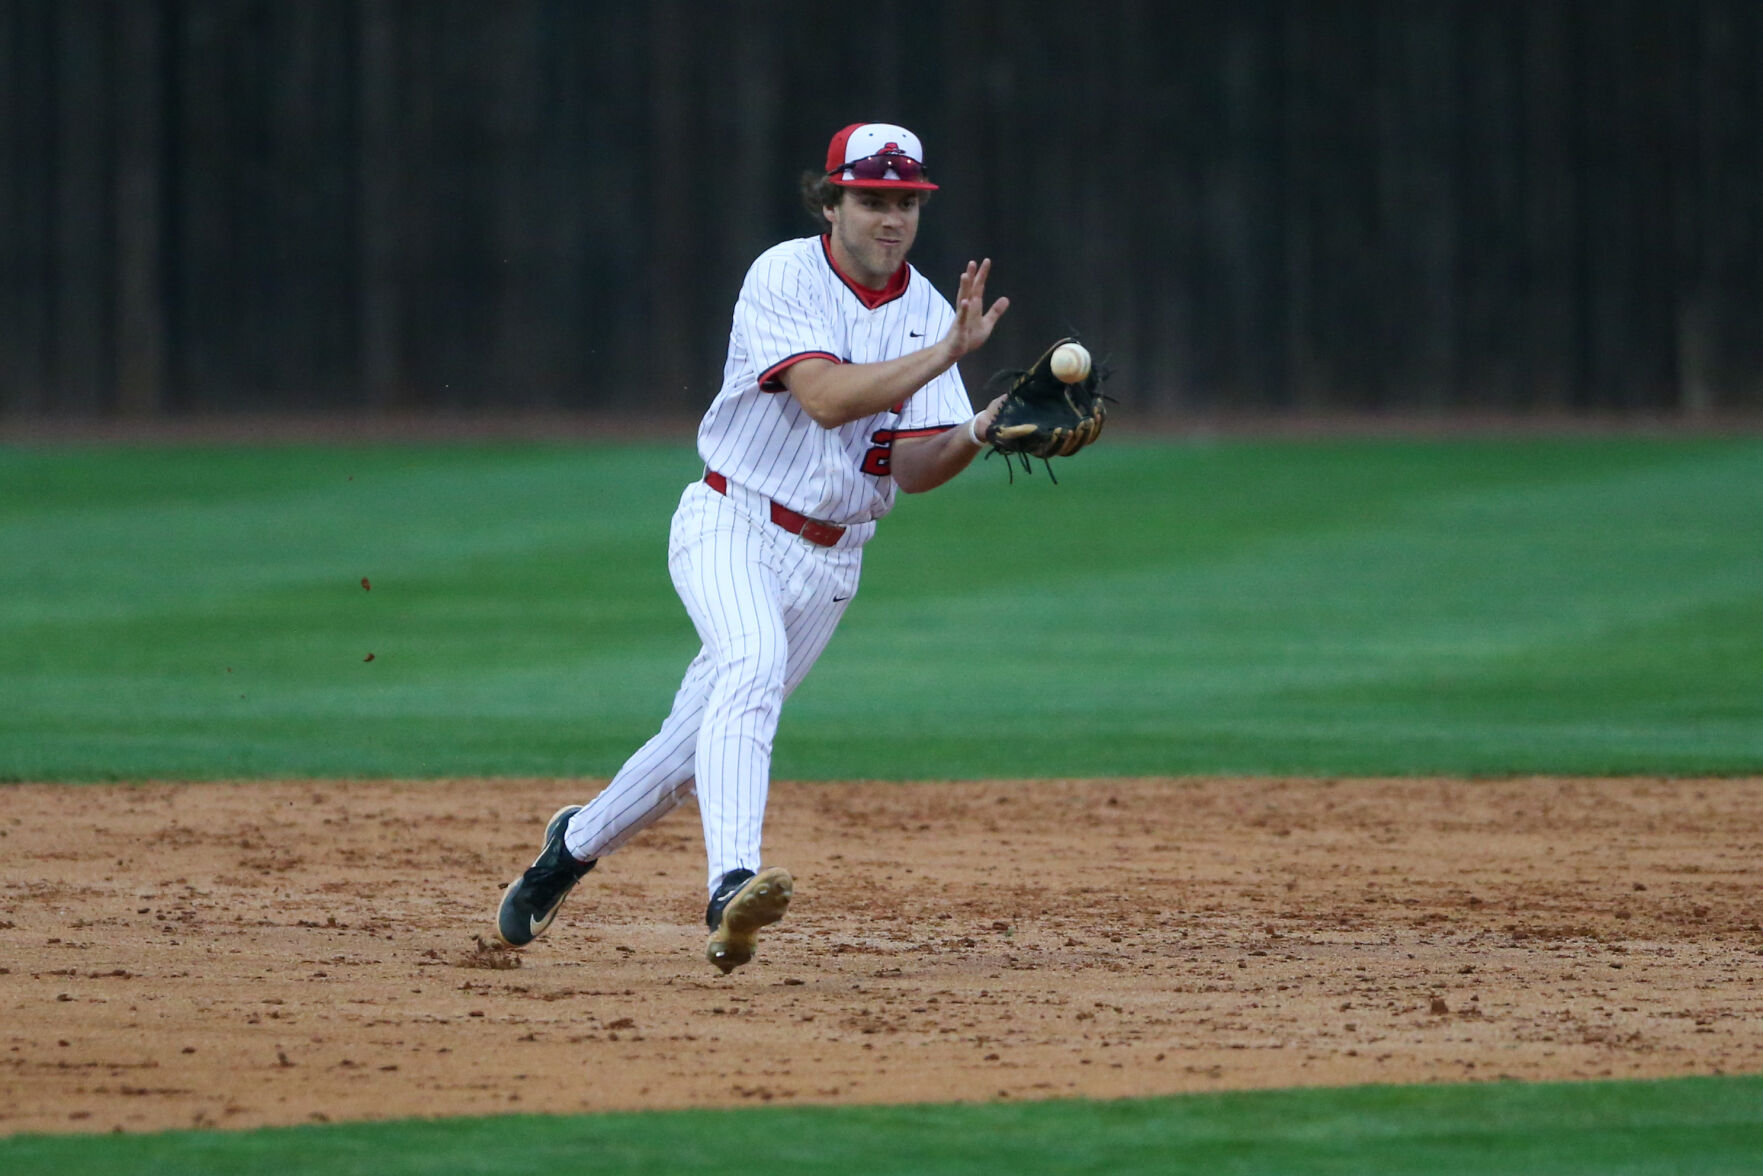 Colonels end regular-season play with eight game win streak